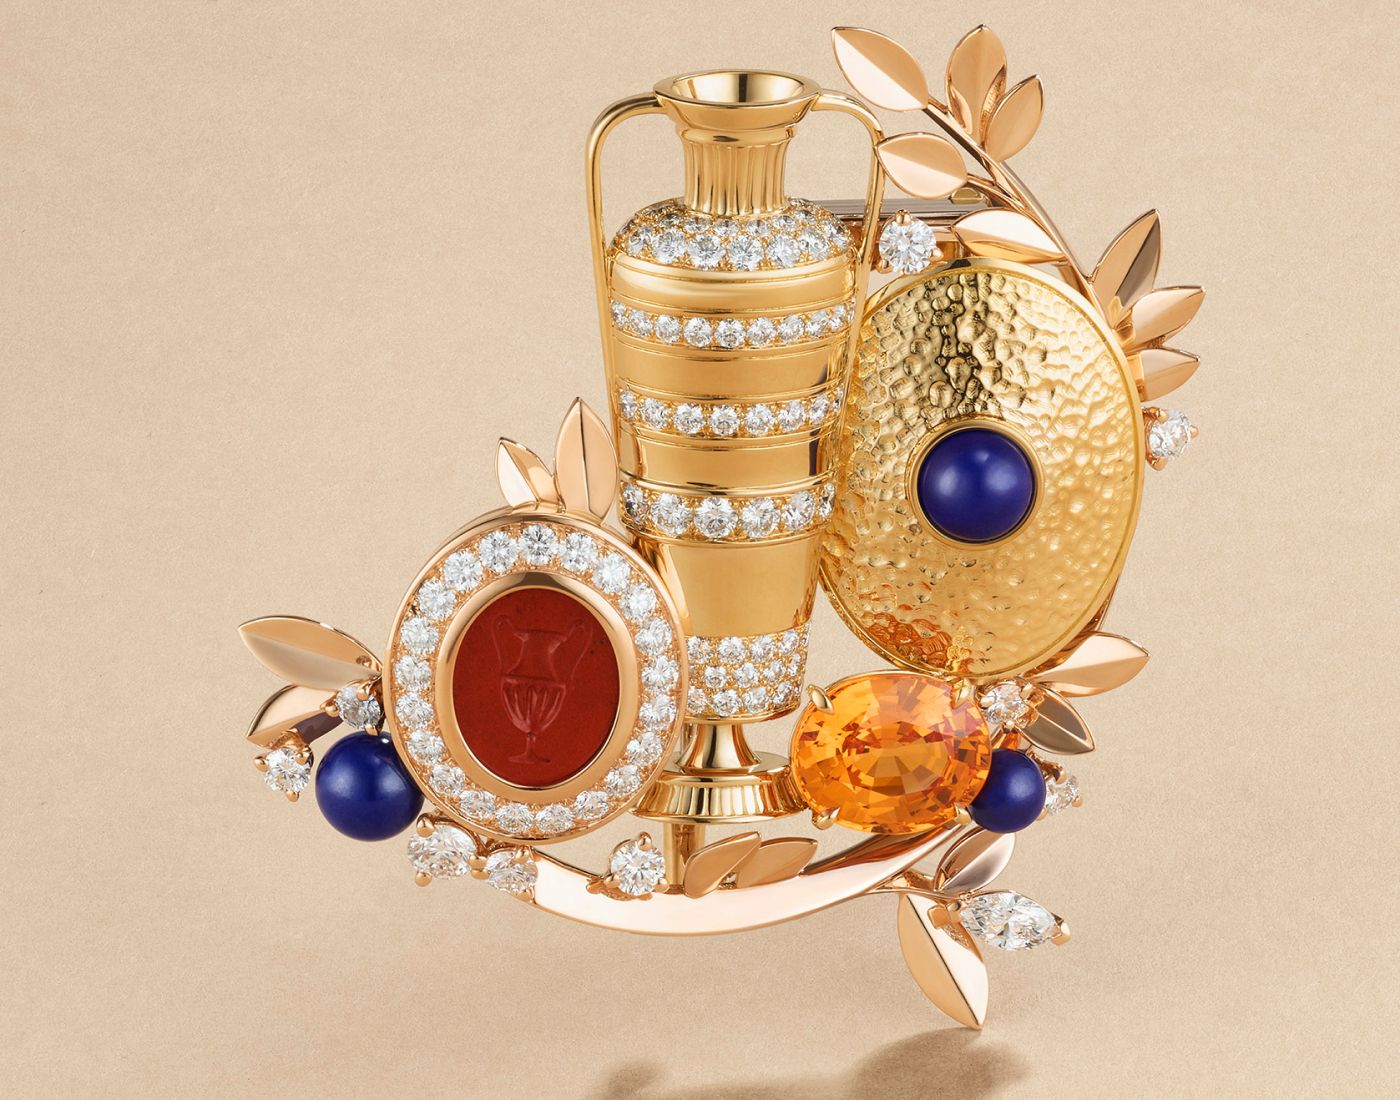 Van Cleef & Arpels Anfora clip in gold, rose gold, a 3.47-ct carved red jasper motif, a 4.87-ct oval-cut spessartite garnet, lapis lazuli and diamonds from Le Grand Tour High Jewellery collection